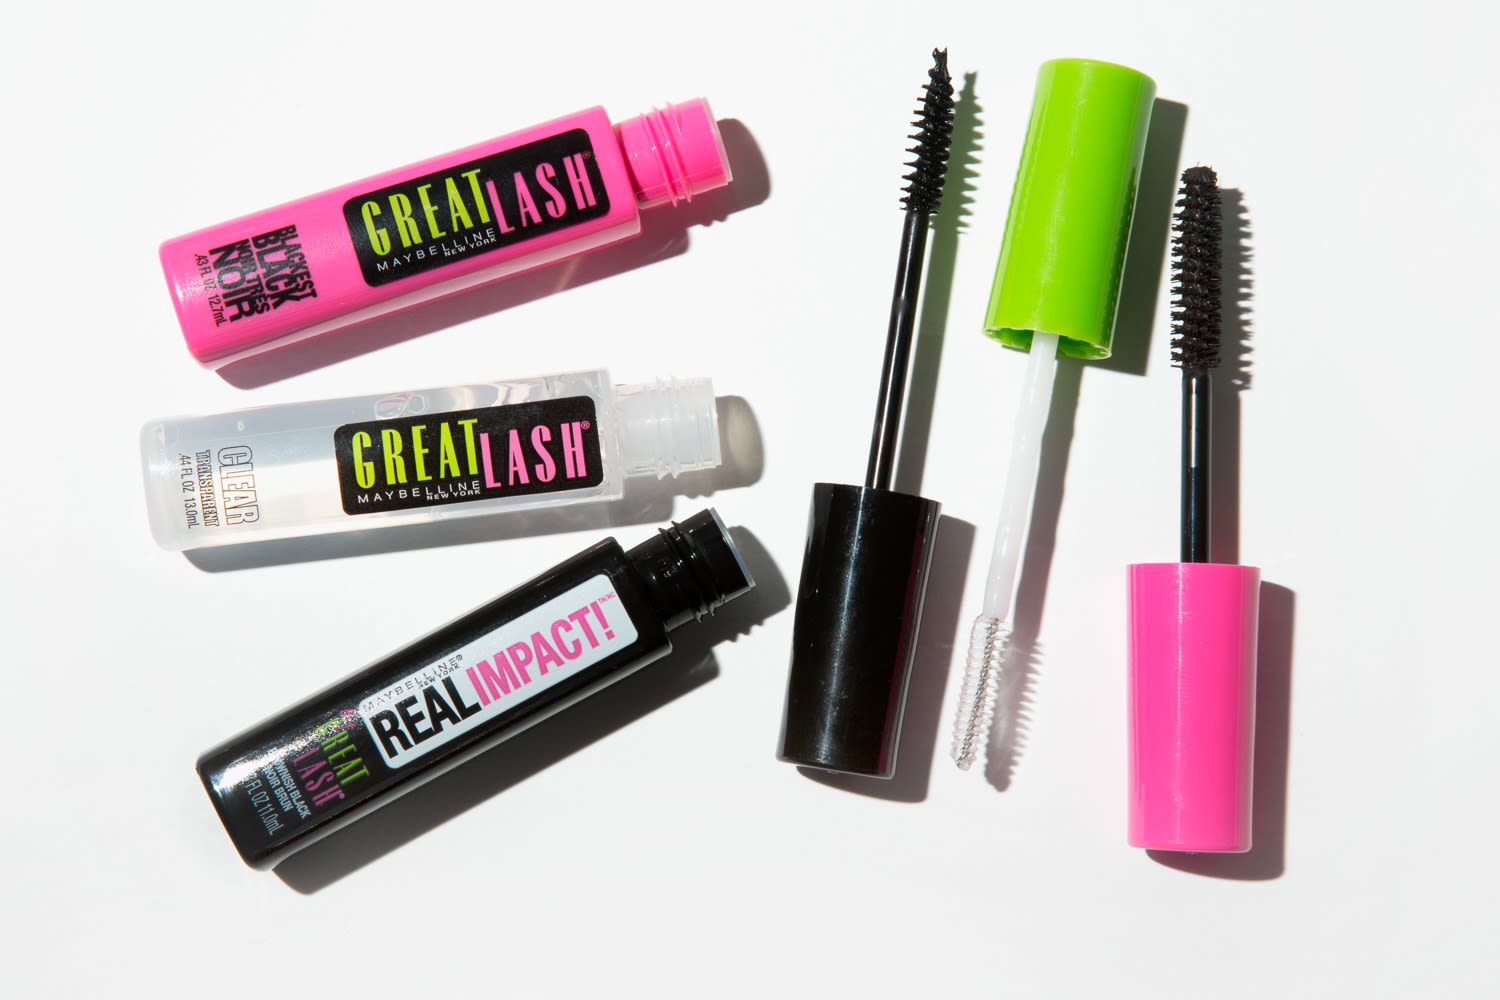 Great Lash: A Journey | Into The Gloss